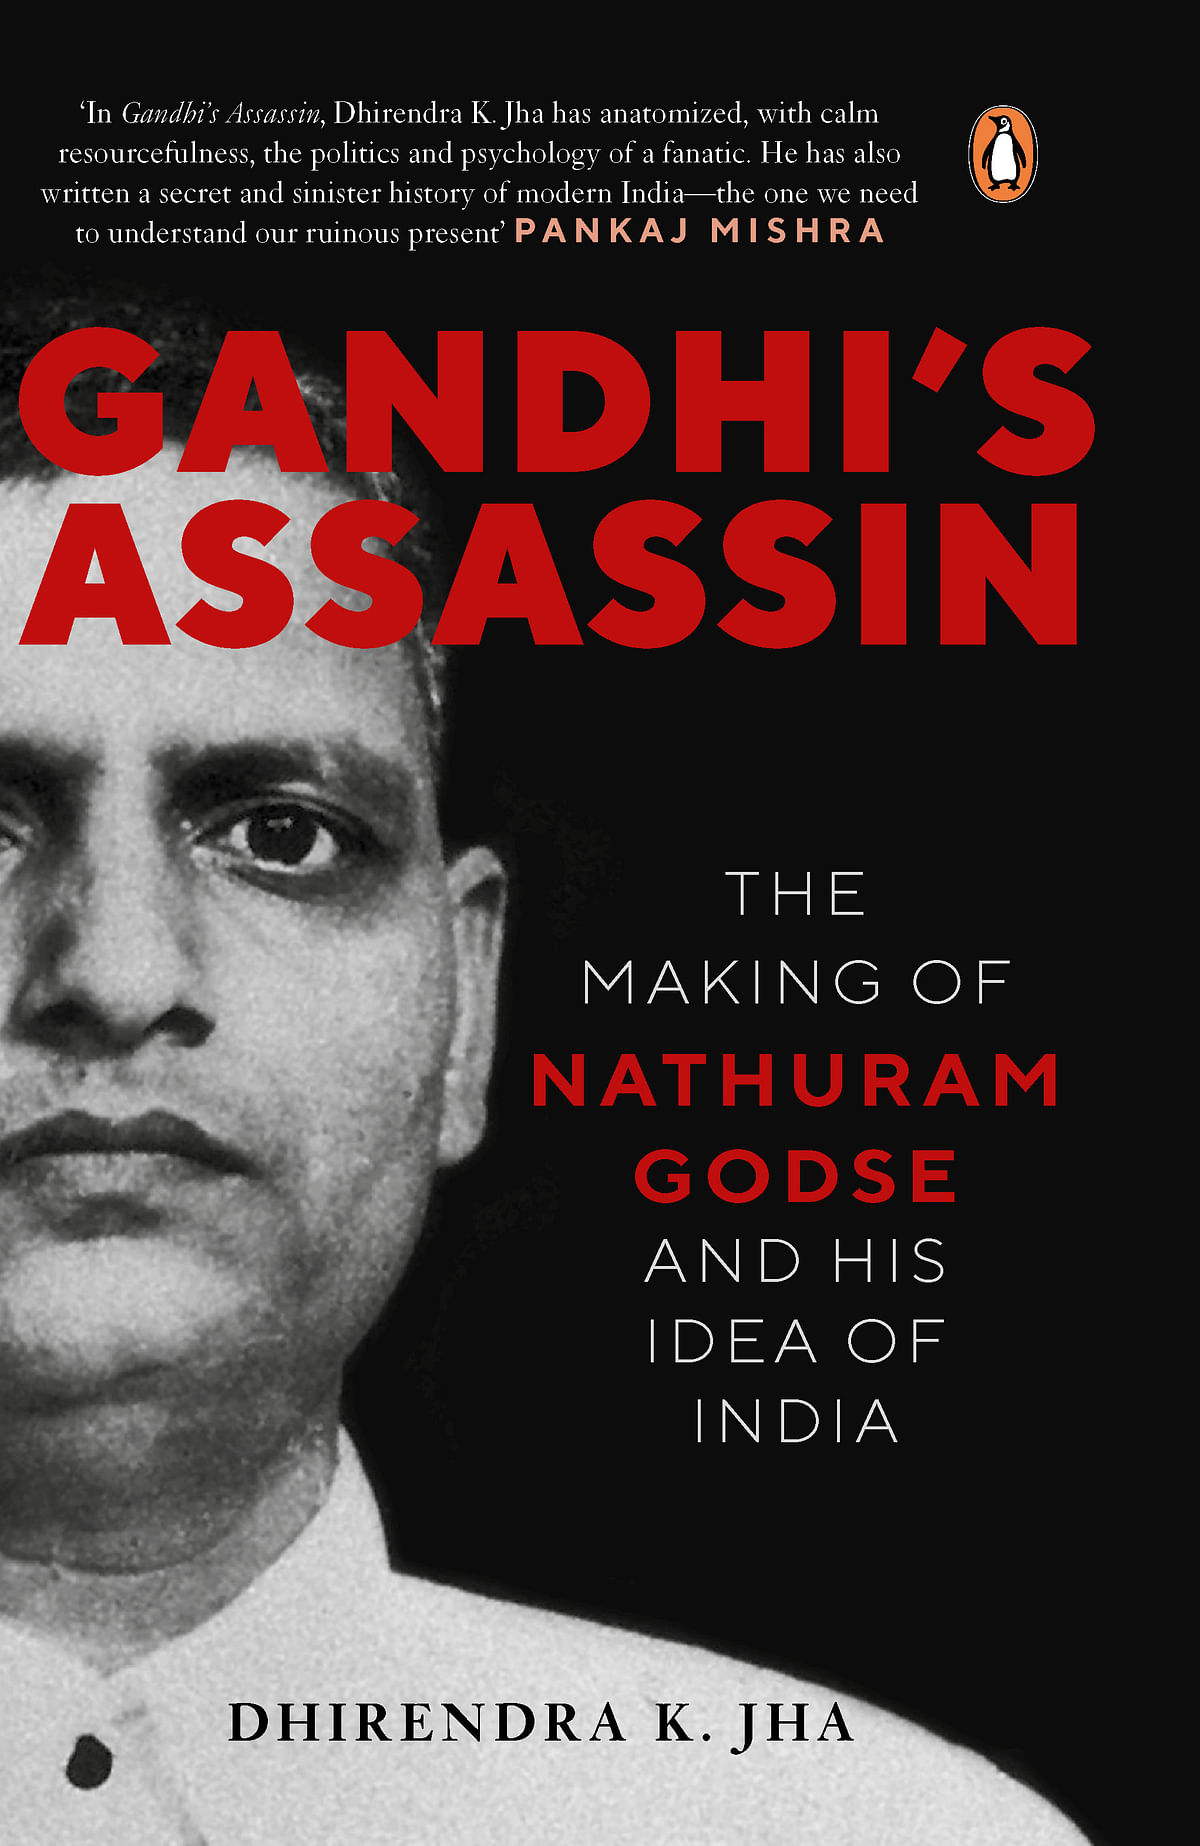 A new book lays bare Godse’s relationship with the organisations that influenced his worldview. Here is an excerpt.